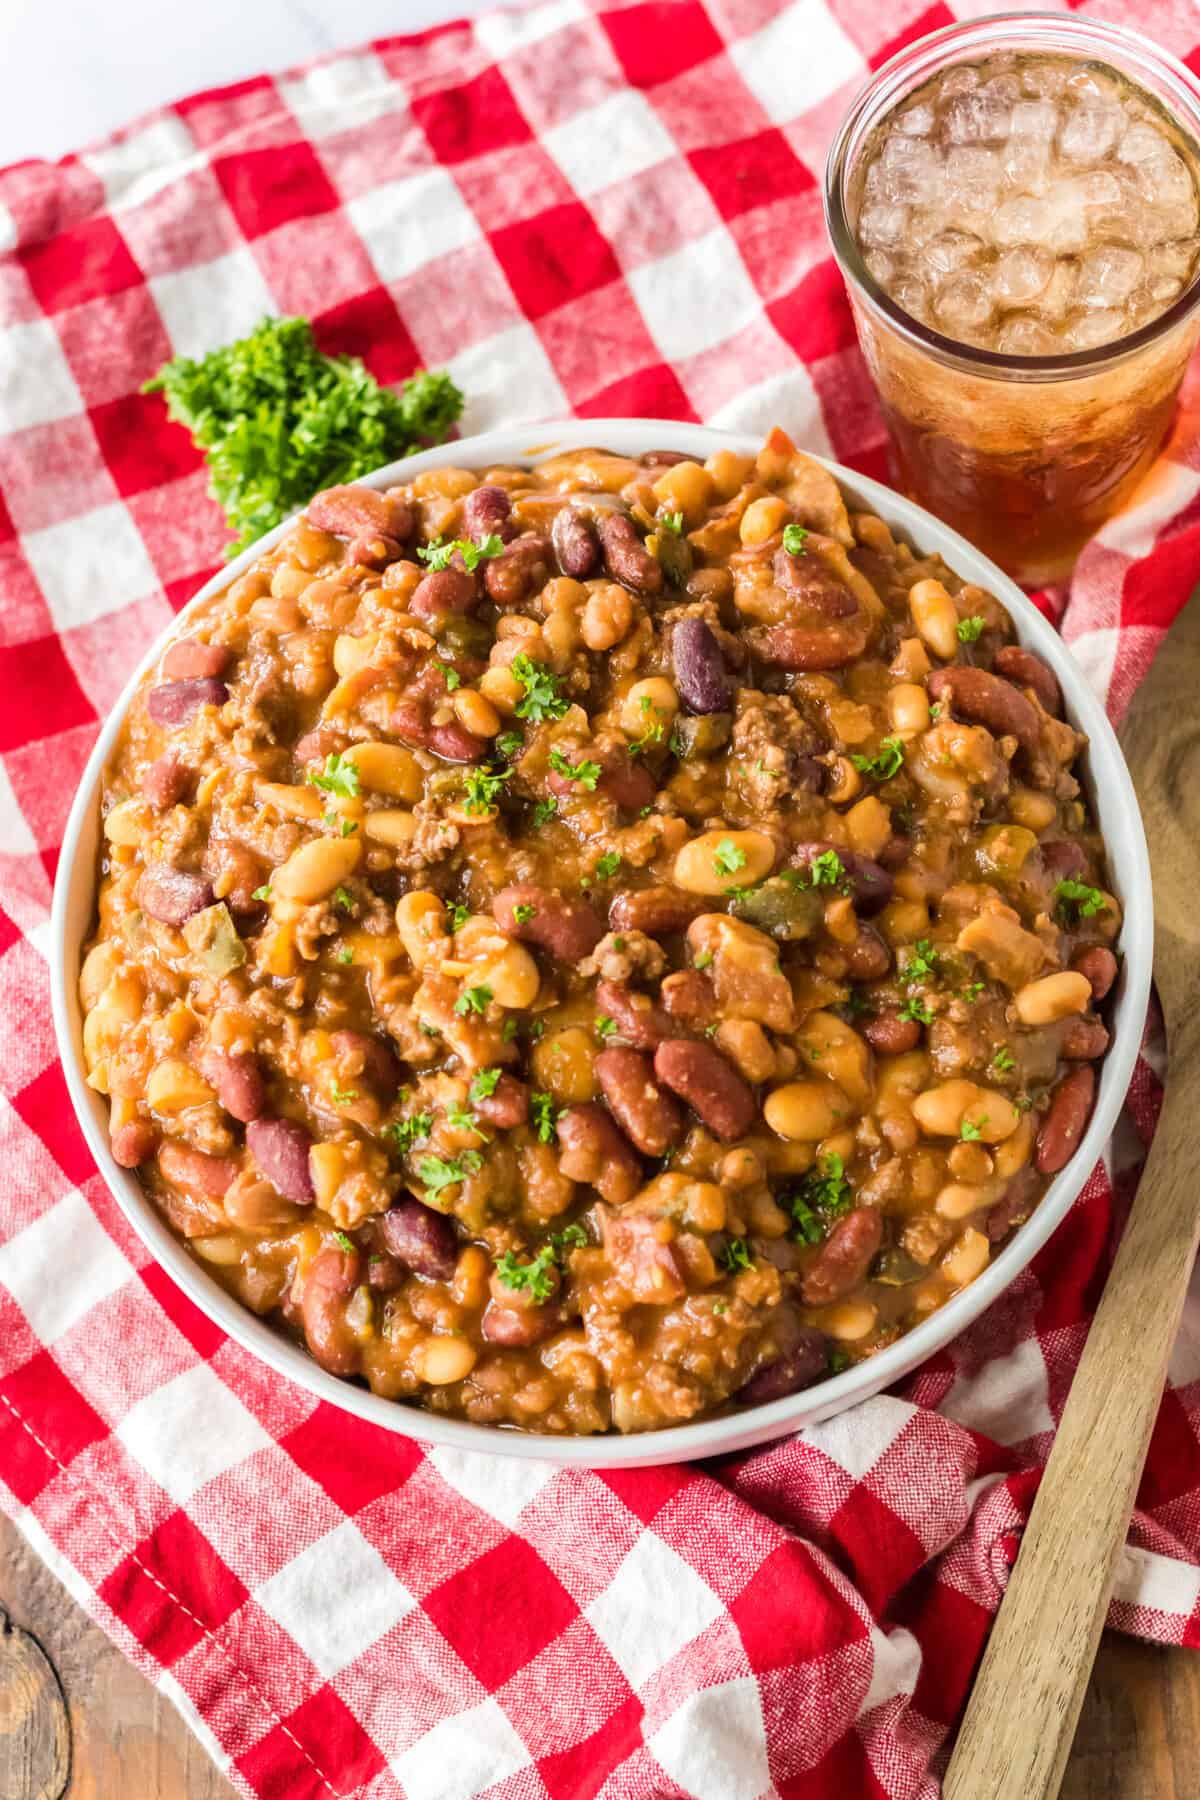 Large bowl of cowboy beans with a cup of iced tea on a red plaid tablecloth.